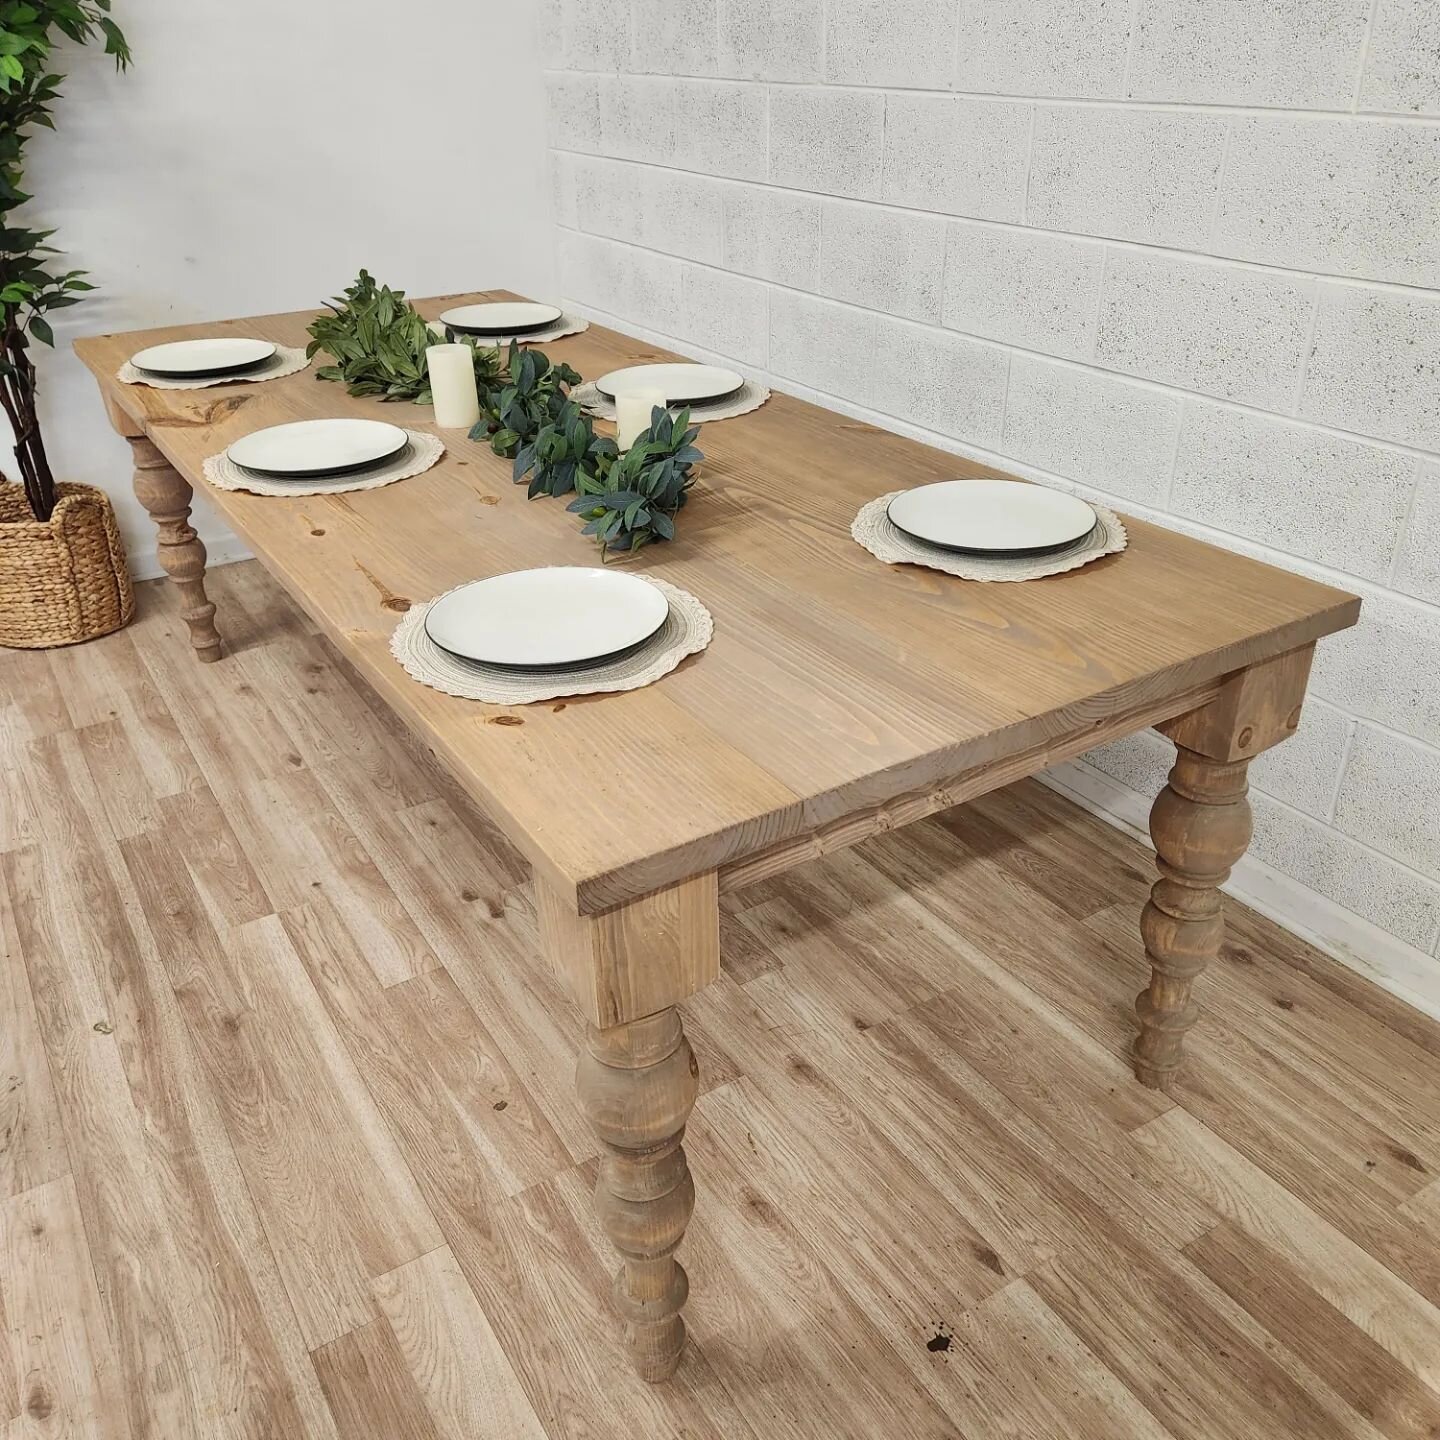 The Sawyer table in construction grade pine with wood chip stain. Made in Nashville.